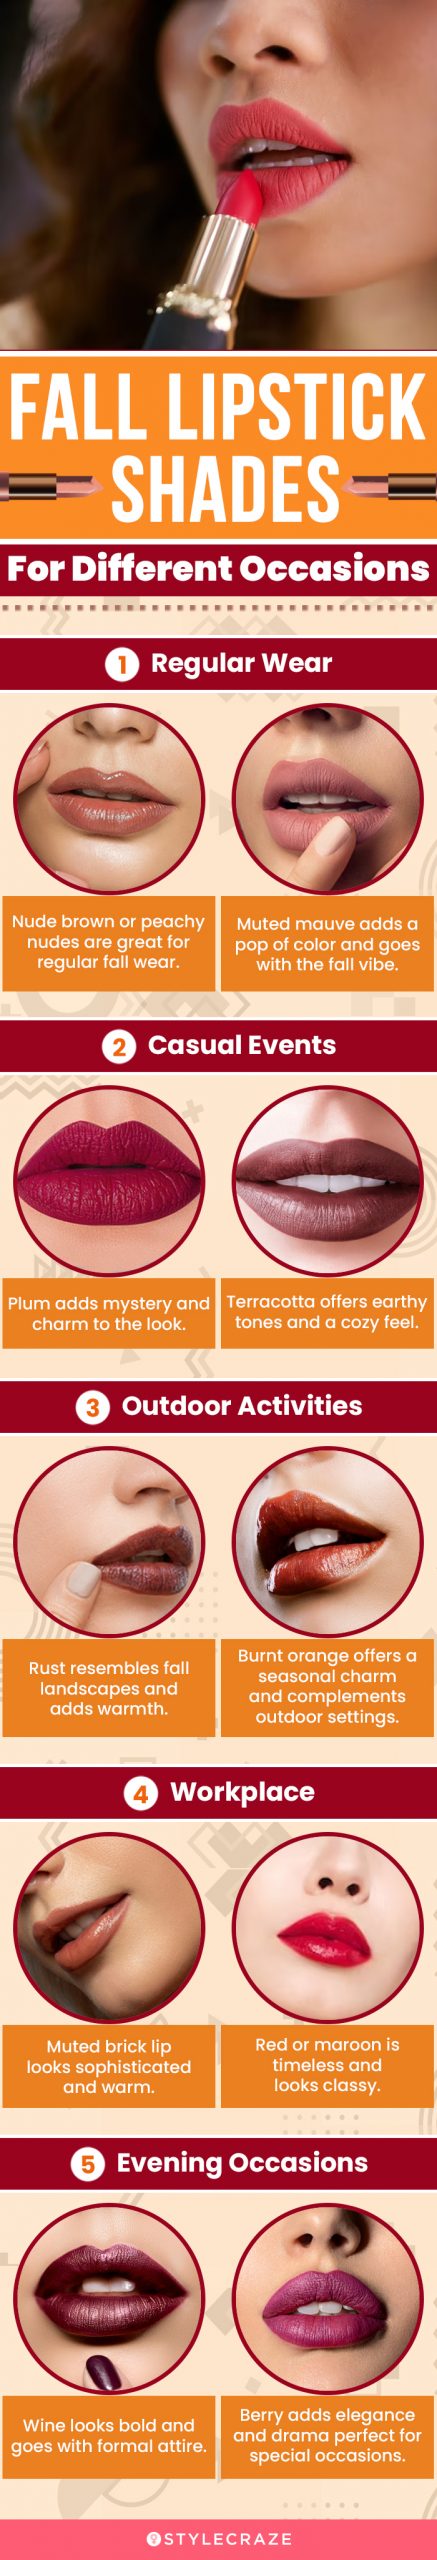 Fall Lipstick Shades For Different Occasions (infographic)